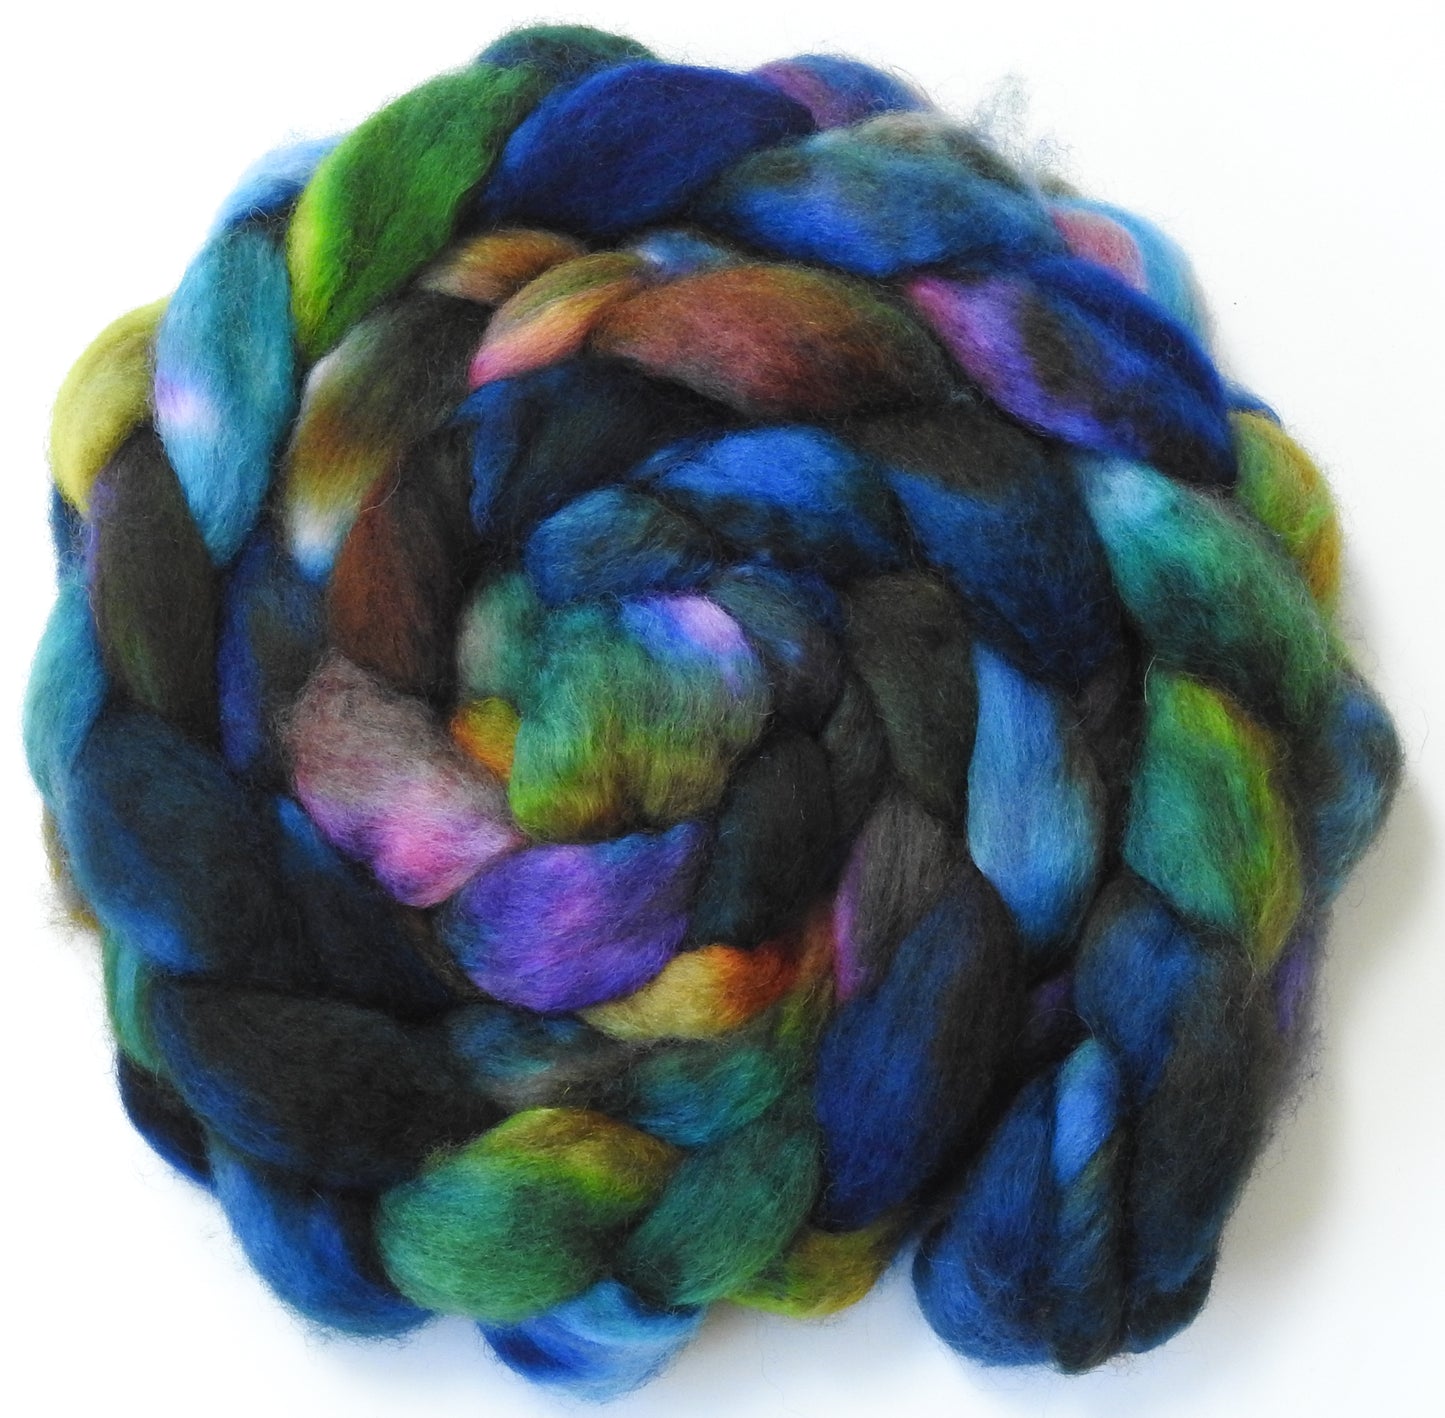 Flight of Fancy (5.9 oz)-Fusion Series - Blue-faced Leicester/ Mohair (70/30)